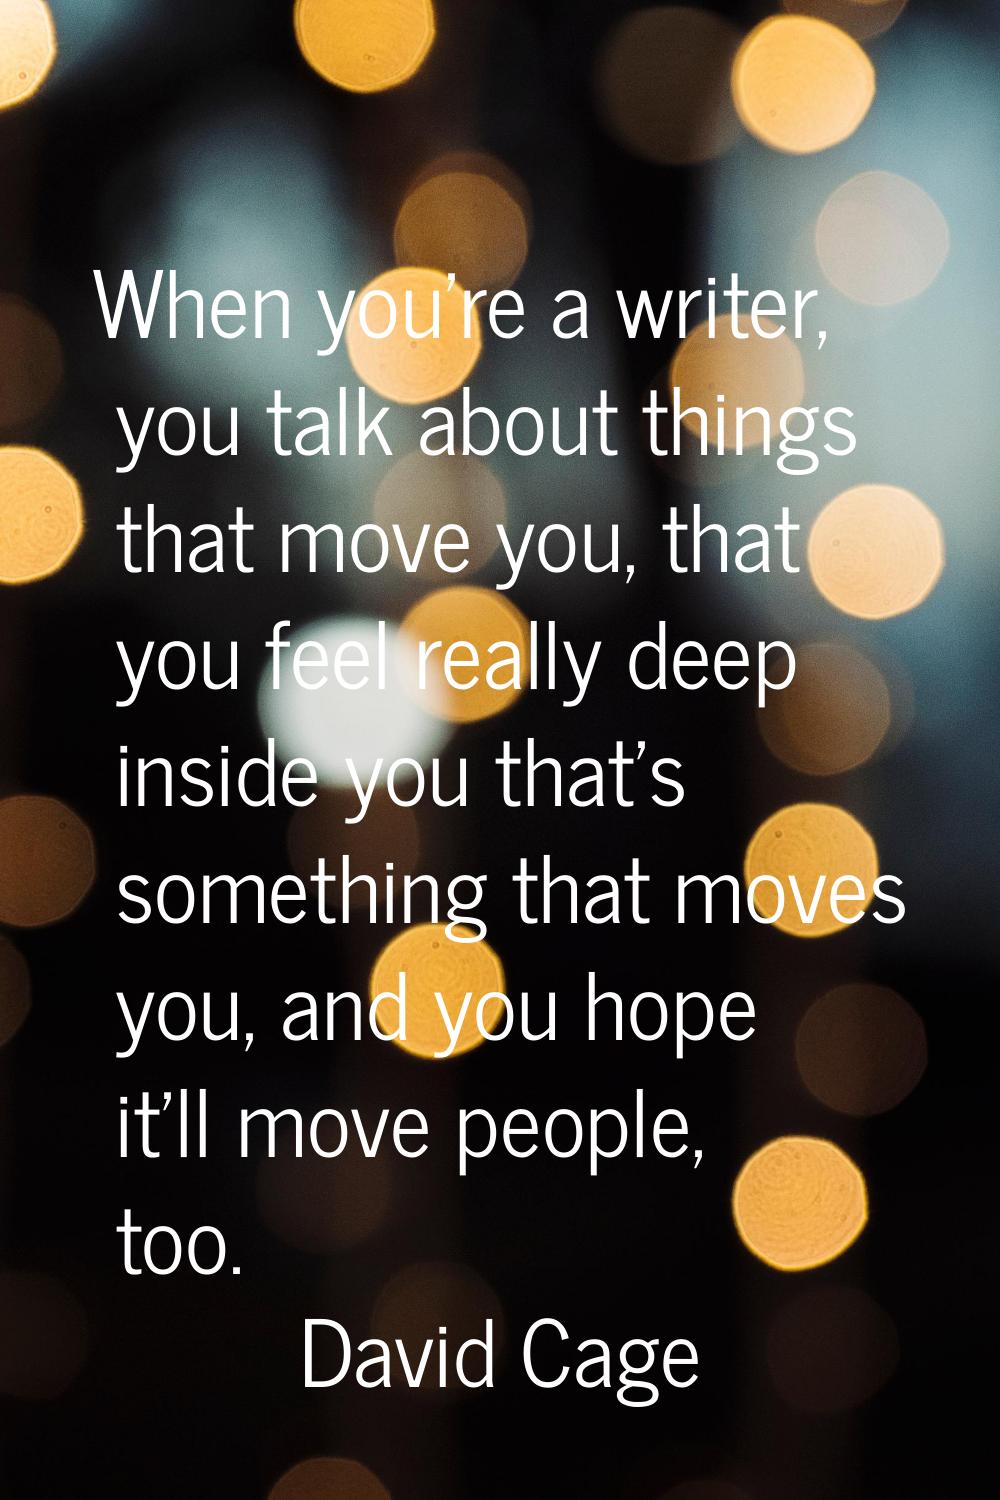 When you're a writer, you talk about things that move you, that you feel really deep inside you tha